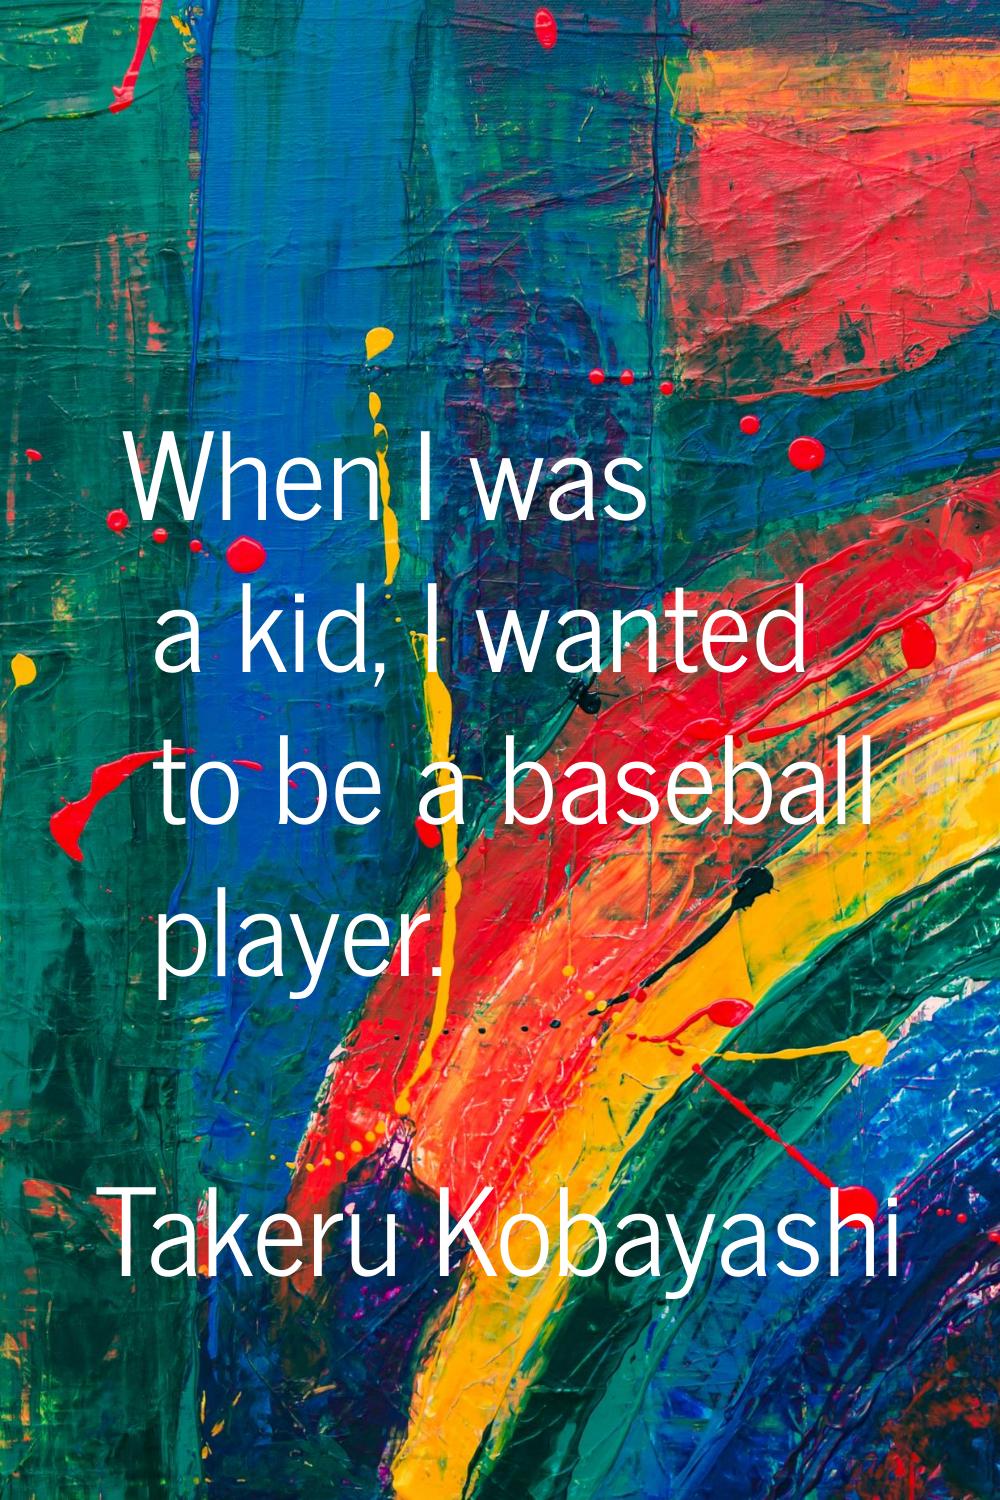 When I was a kid, I wanted to be a baseball player.